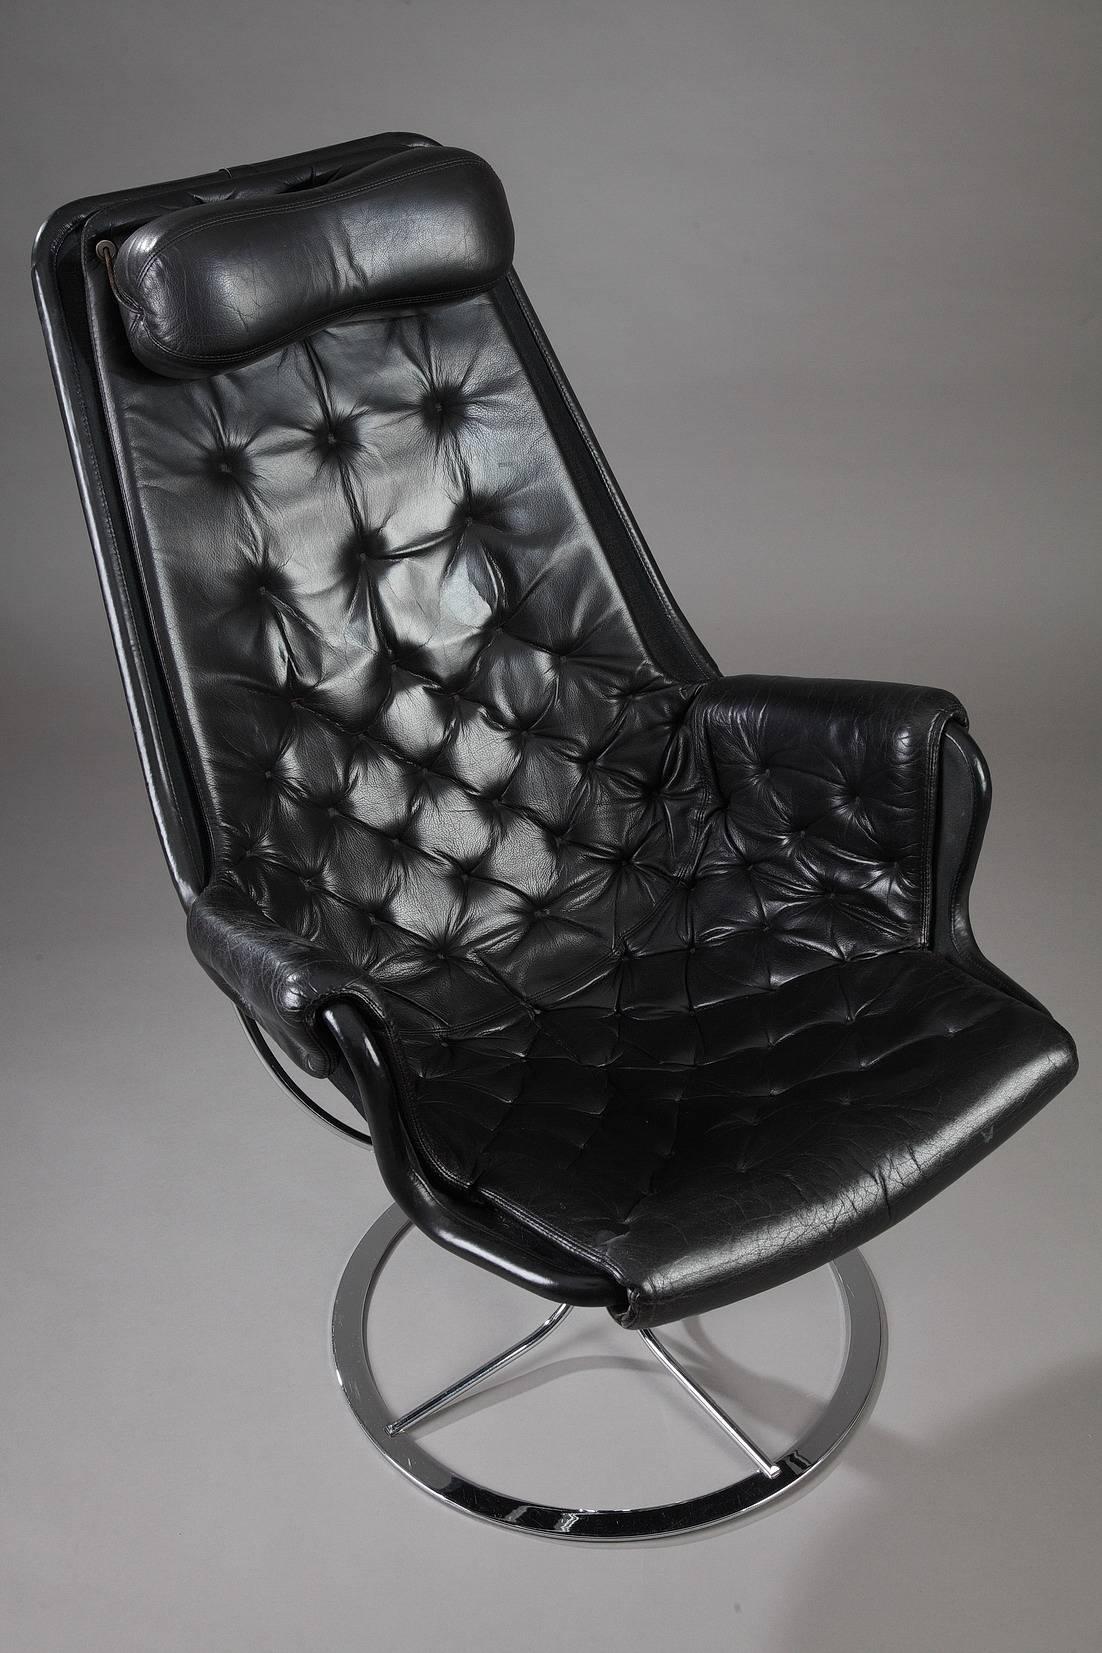 Bruno Mathsson (1907-1988): Jetson swivel armchair with chromed steel frame. Seat, back, armrests and neck rest upholstered with black leather. Manufactured by DUX in Sweden. Marked: Bruno Mathsson and Made by DUX,

circa 1980
Dimension: W 22.8